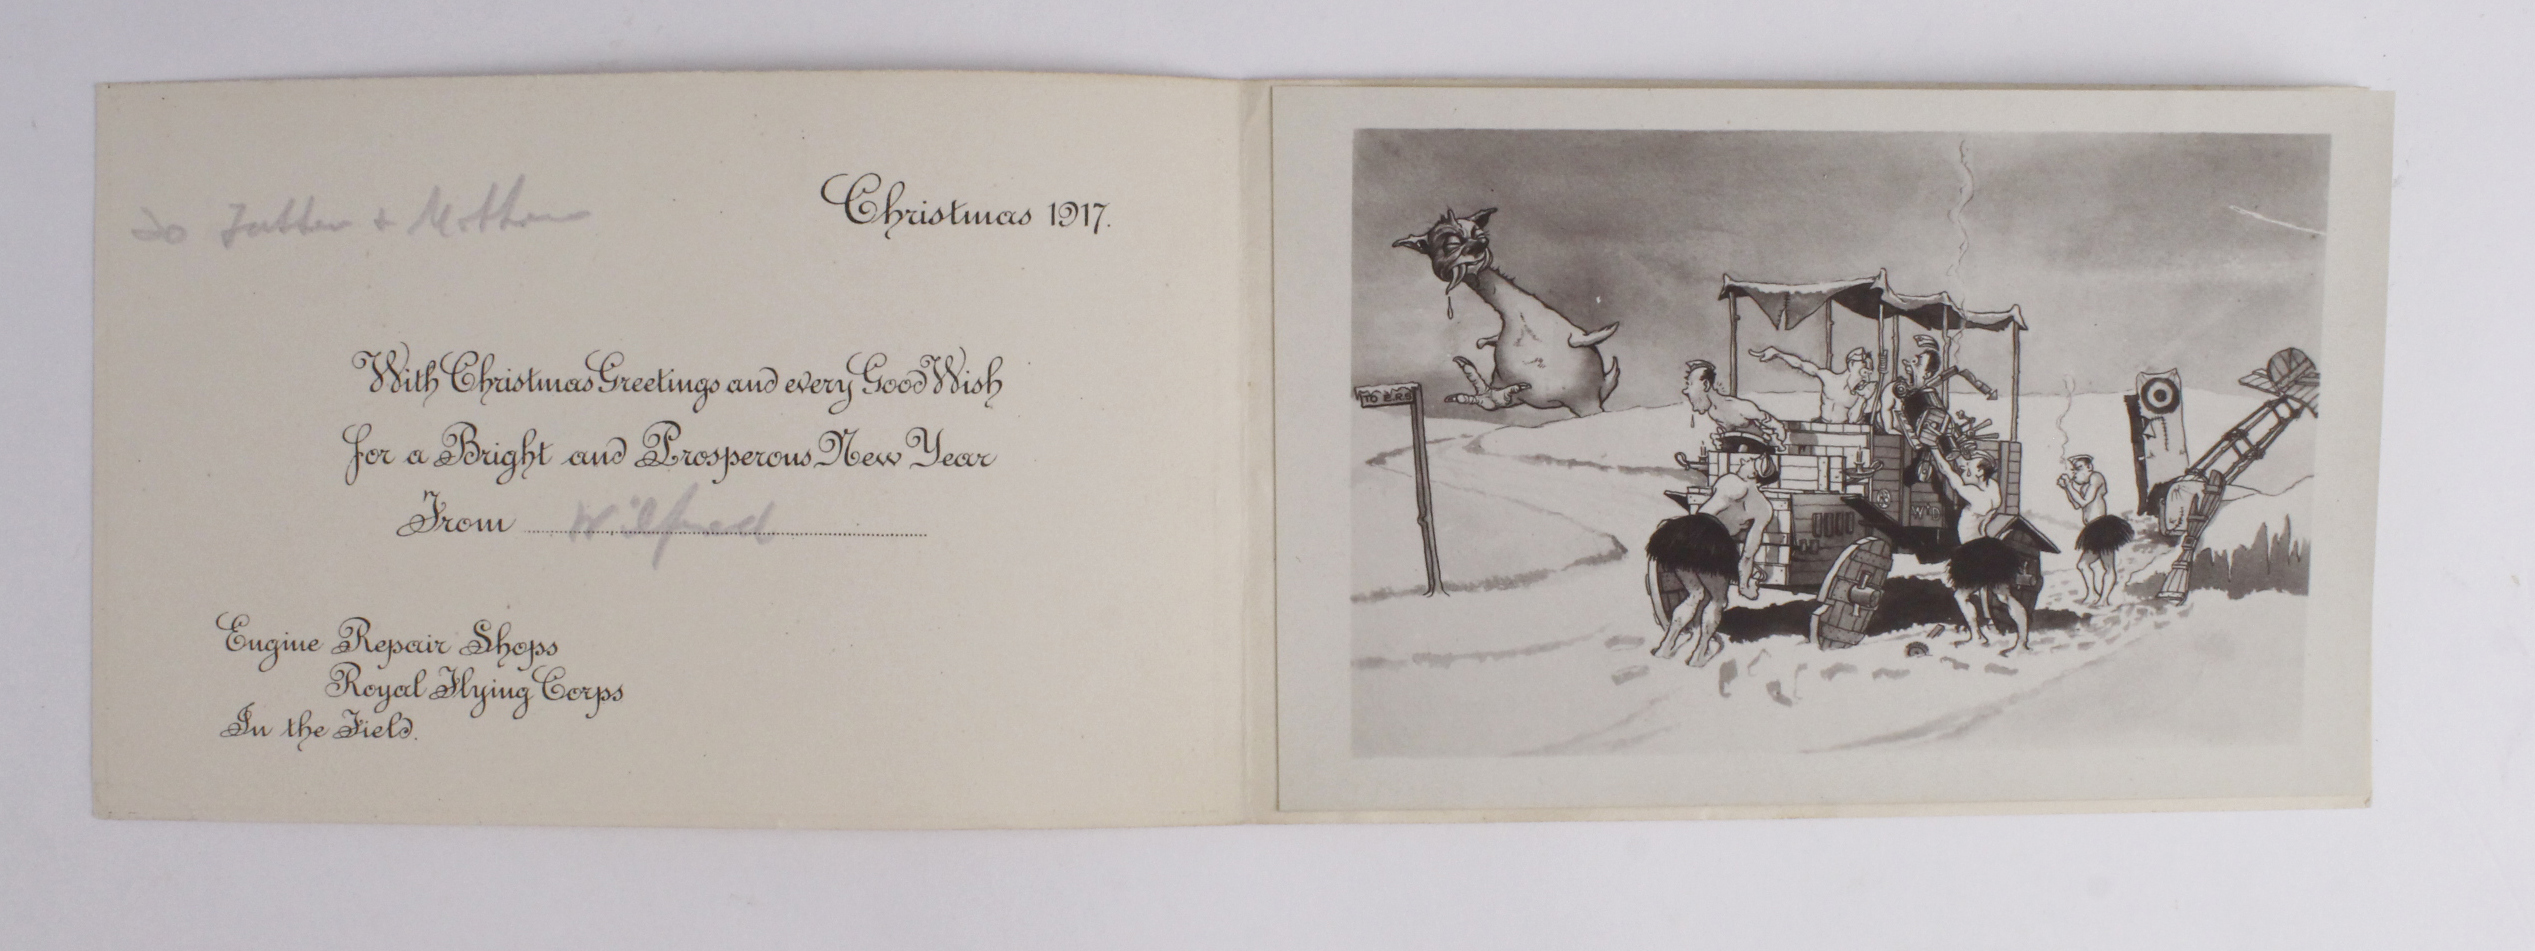 Royal Flying Corps Engine Repair Shops, In the Field, Christmas 1917 card with superb cartoon to